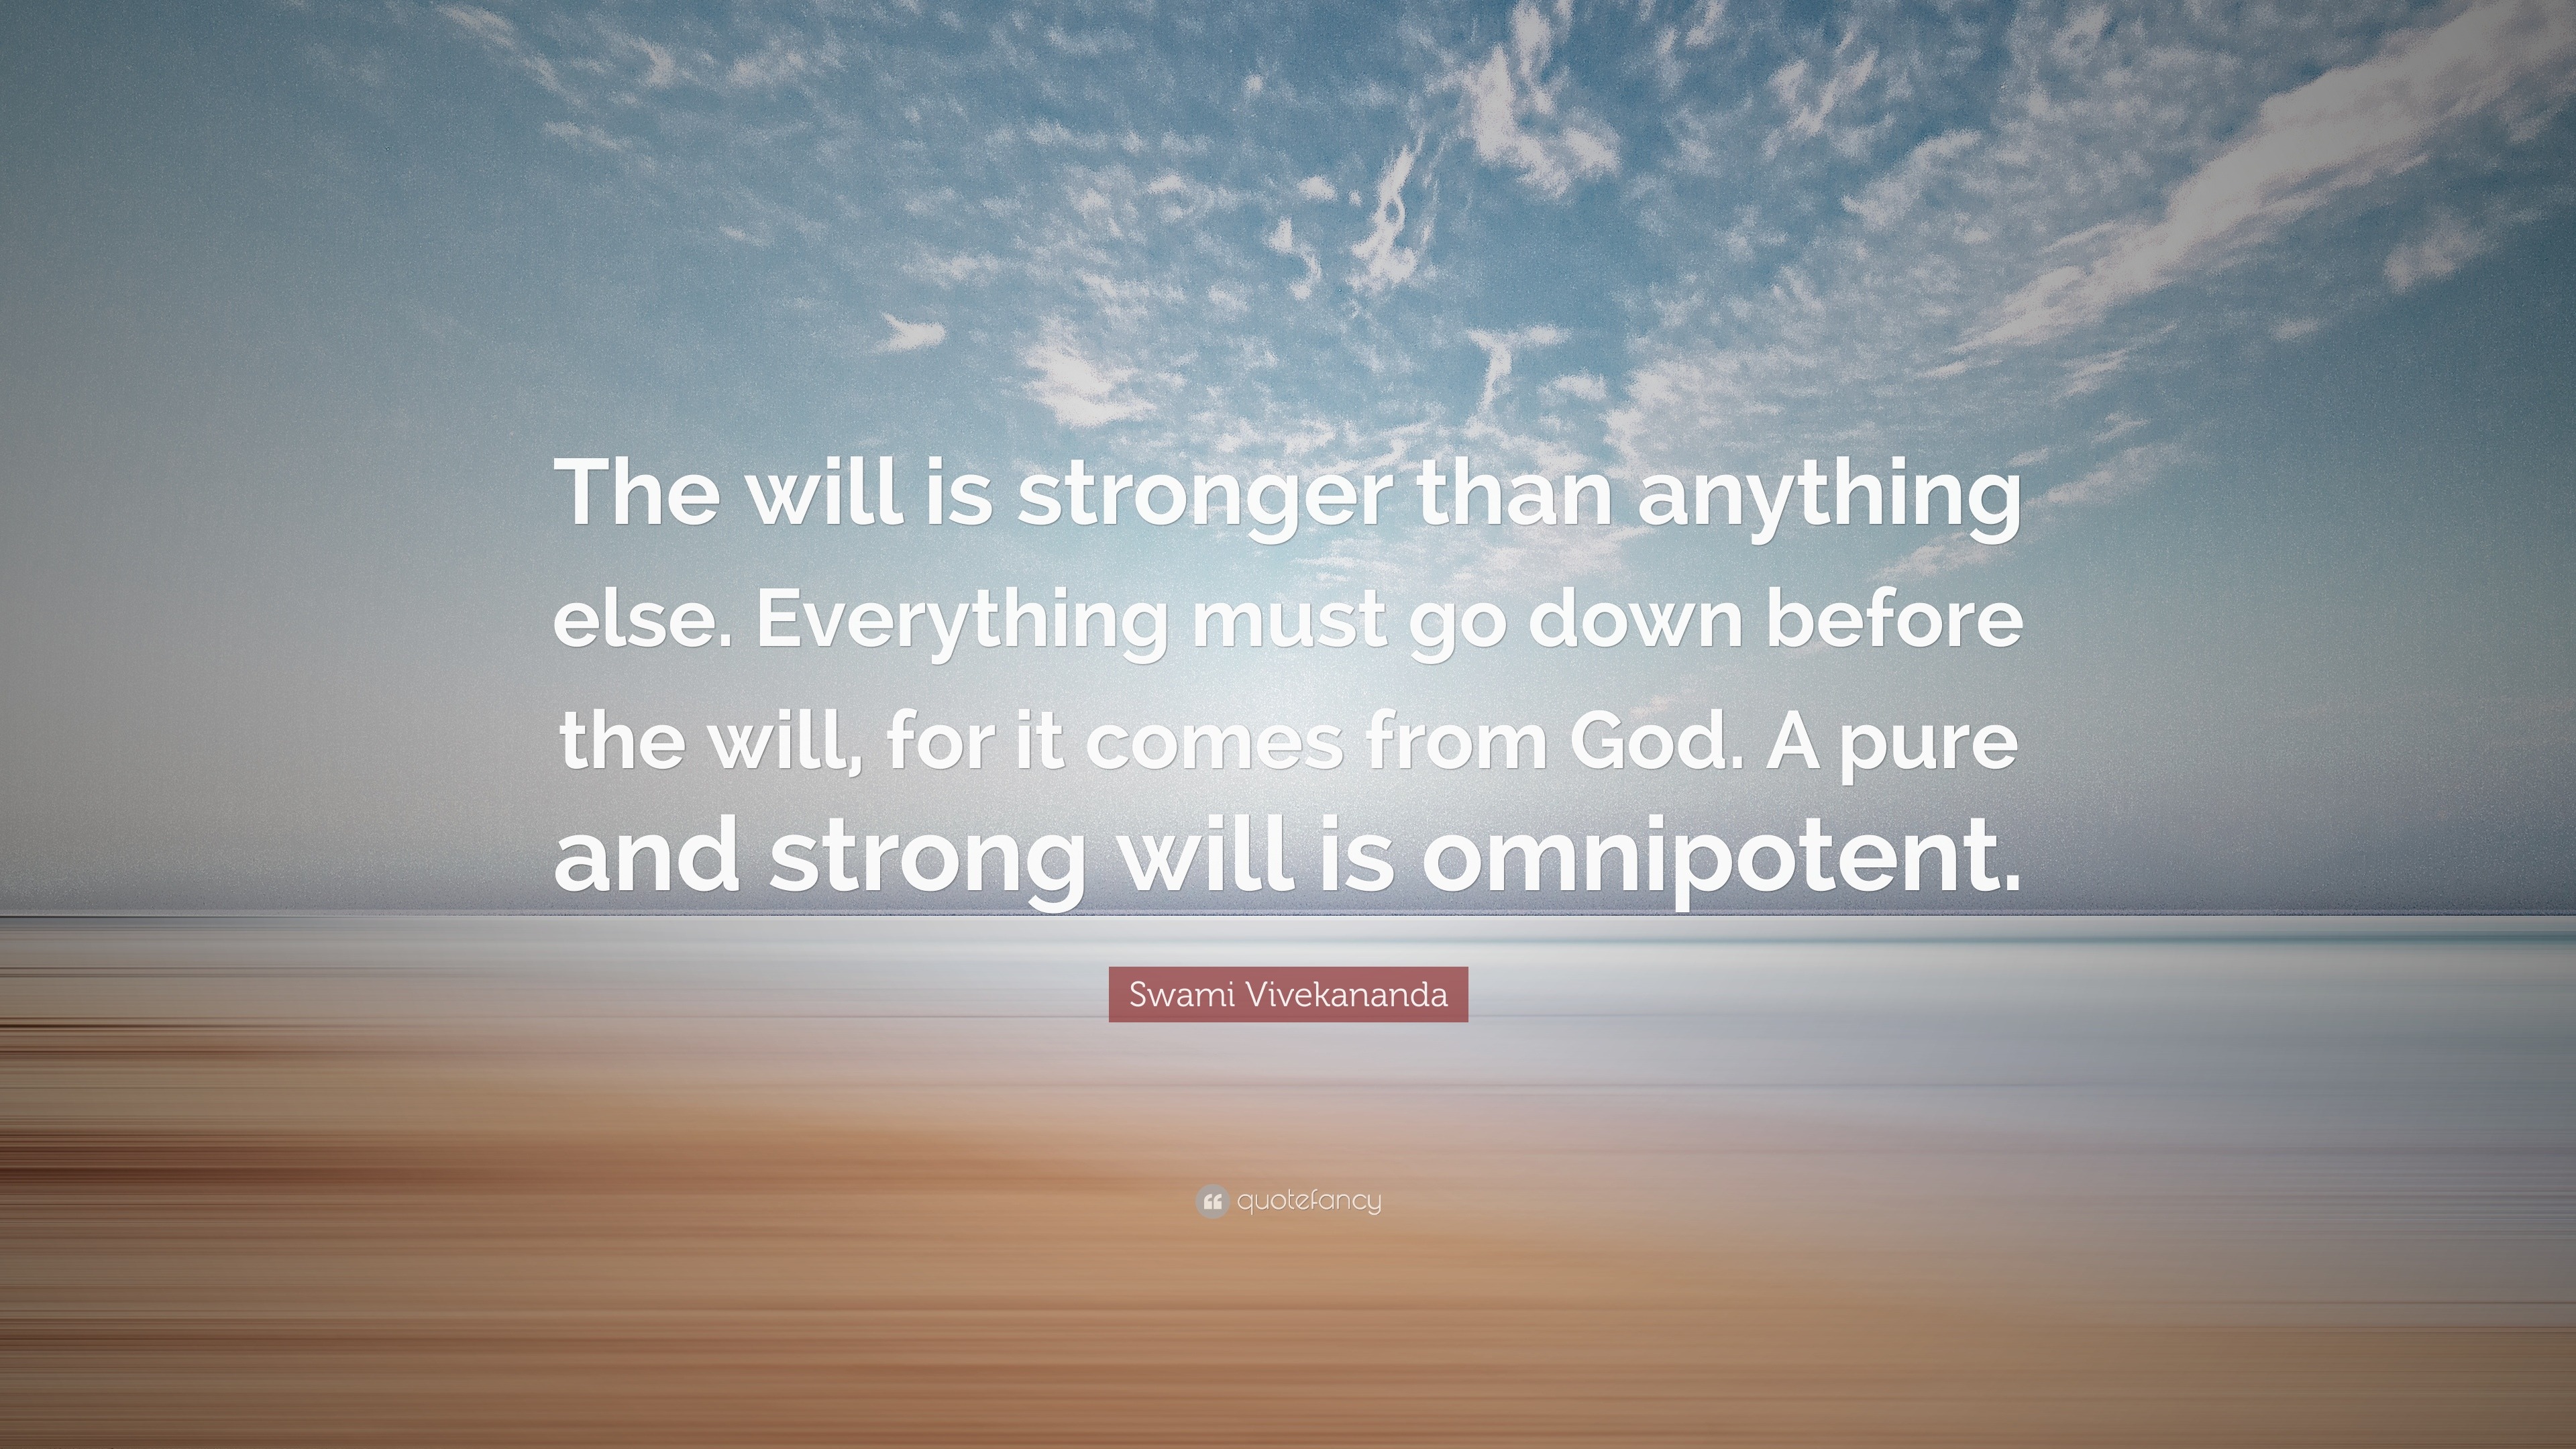 Swami Vivekananda Quote: “The will is stronger than anything else ...